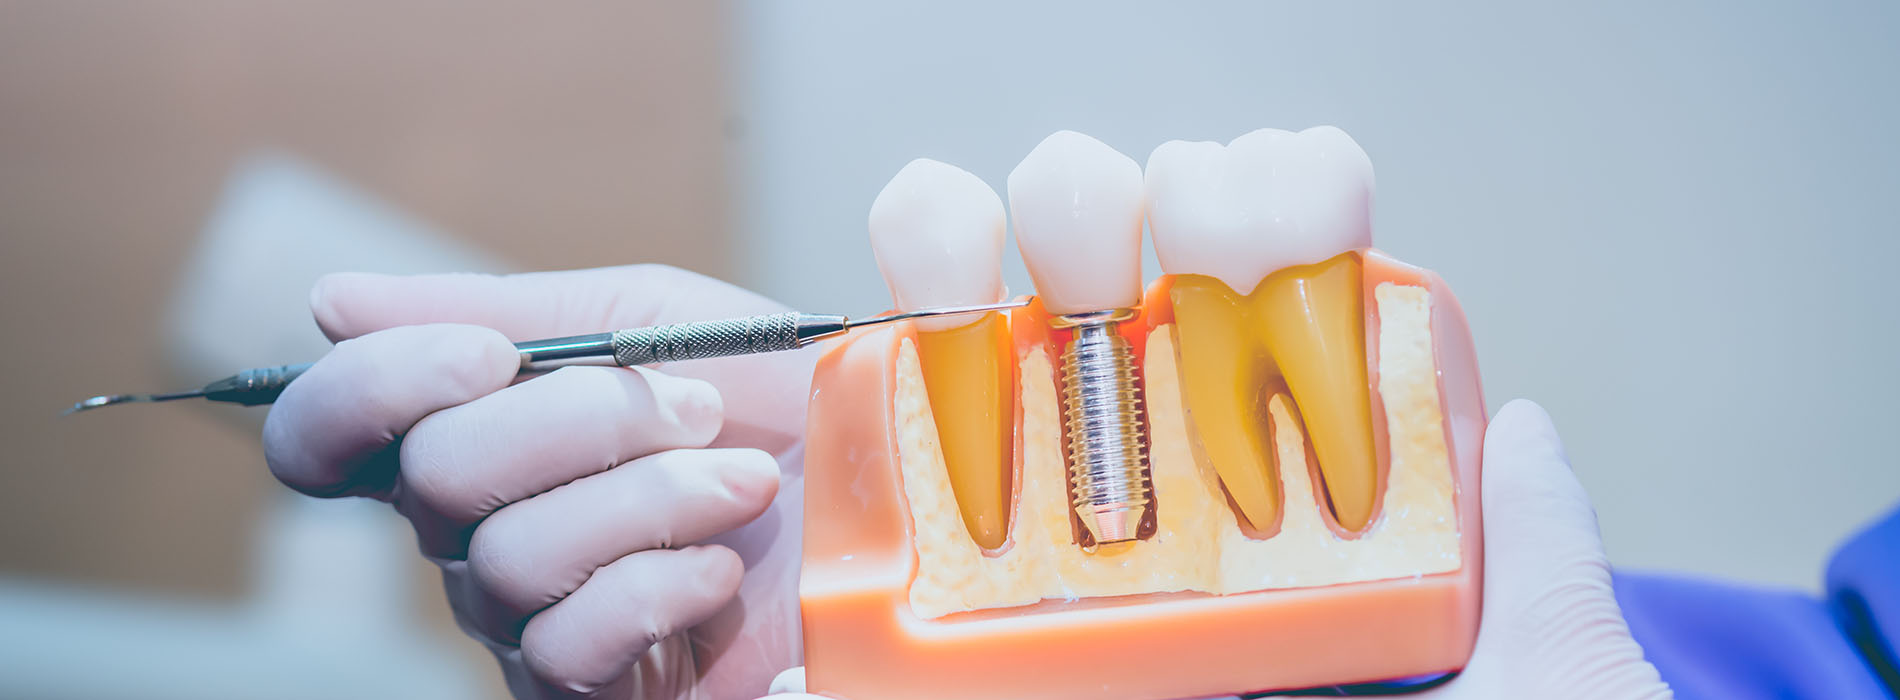 Mann Dental Care | Dental Bridges, Extractions and Dental Cleanings